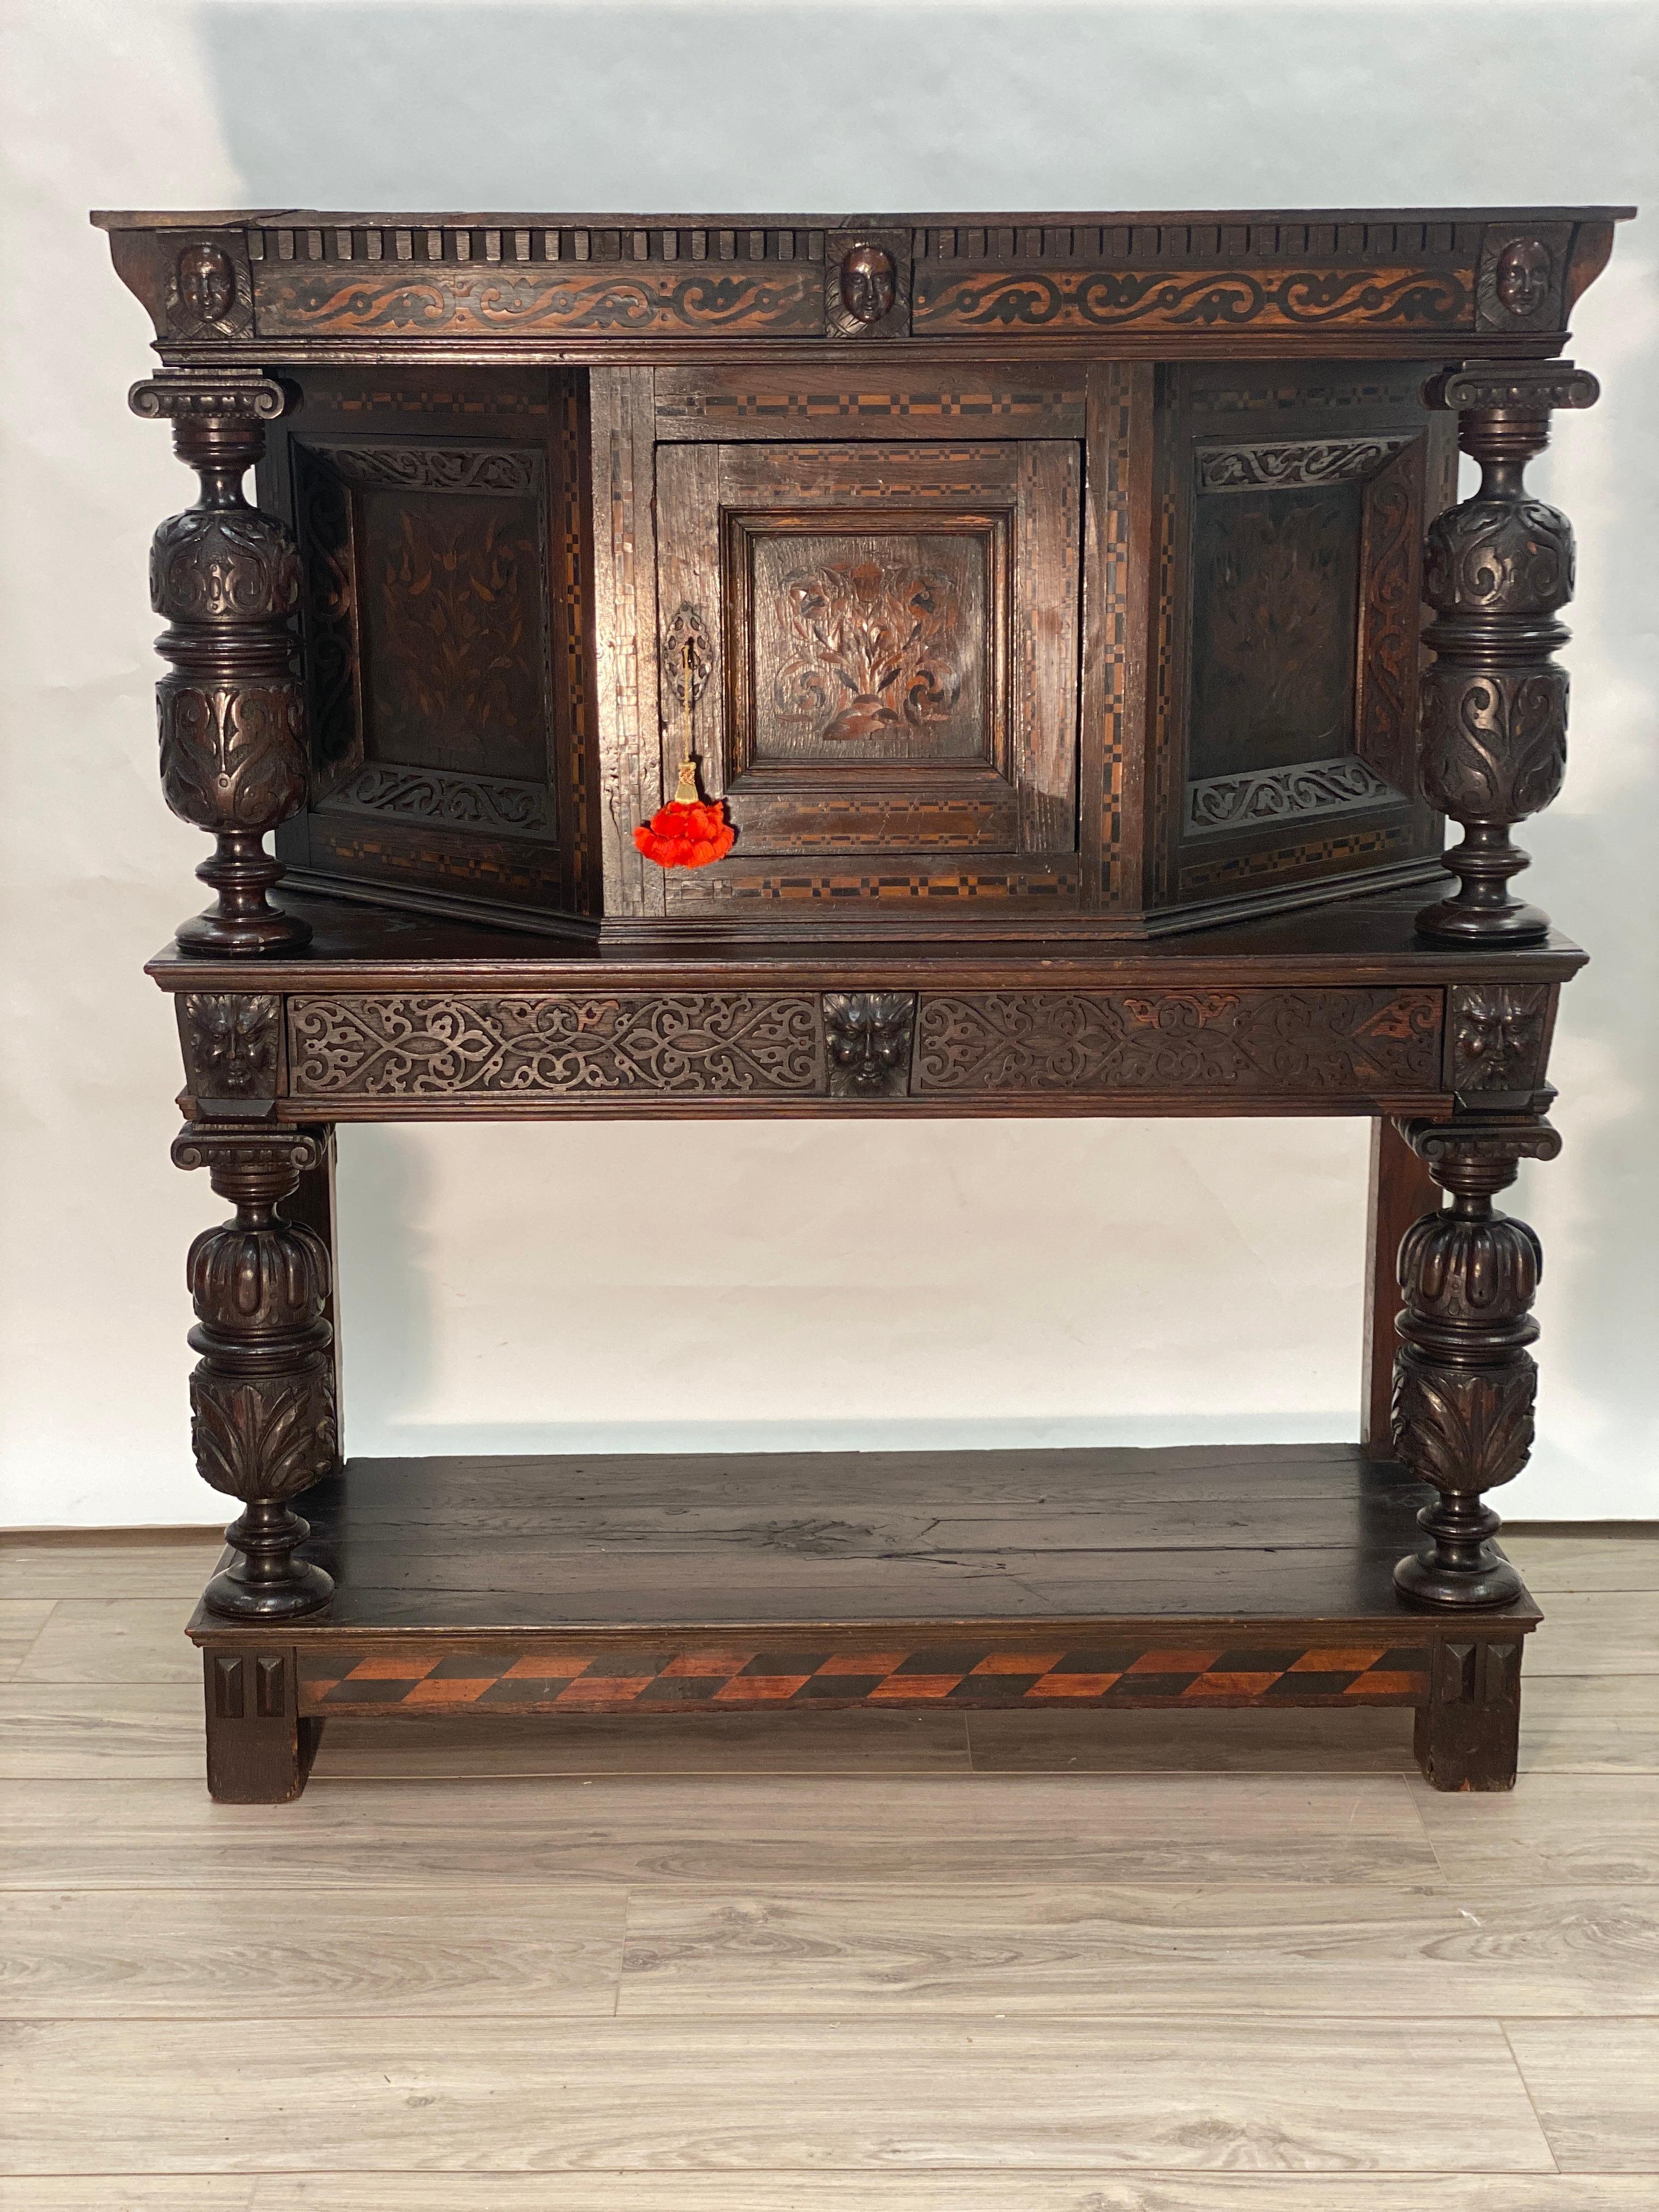 A wonderful early 17th century English Elizabethan Livery cupboard with canted cabinet. Marquetry and Parquetry inlaid on the doors and side panels. Carved bulbous column supports. Carved drawer face on the one center middle drawer. Wonderfully